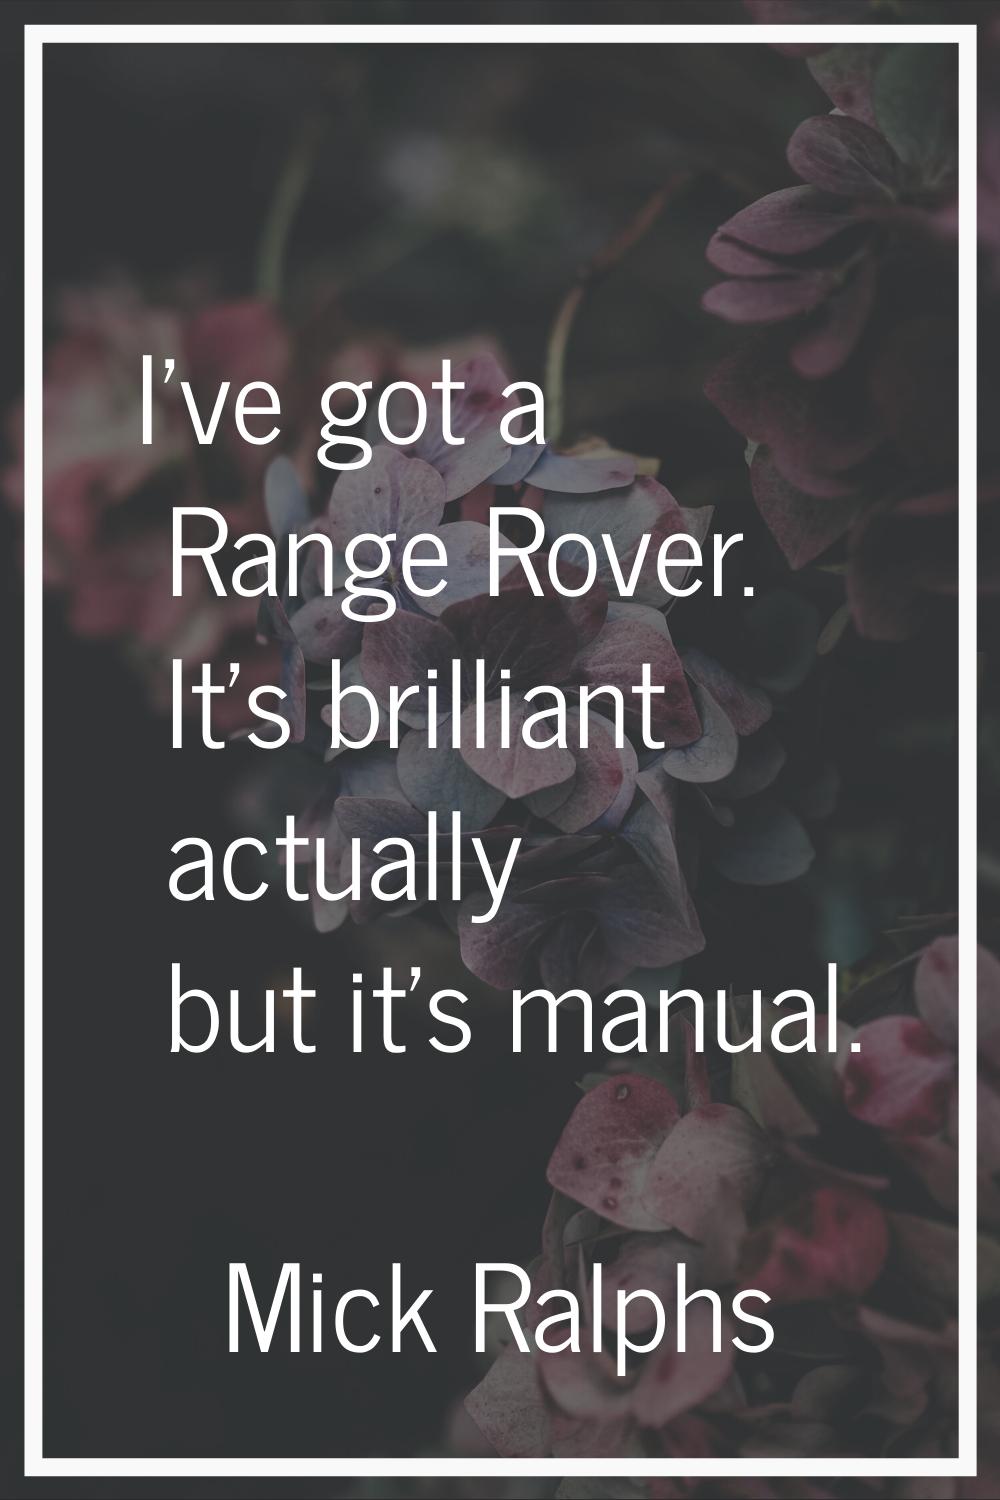 I've got a Range Rover. It's brilliant actually but it's manual.